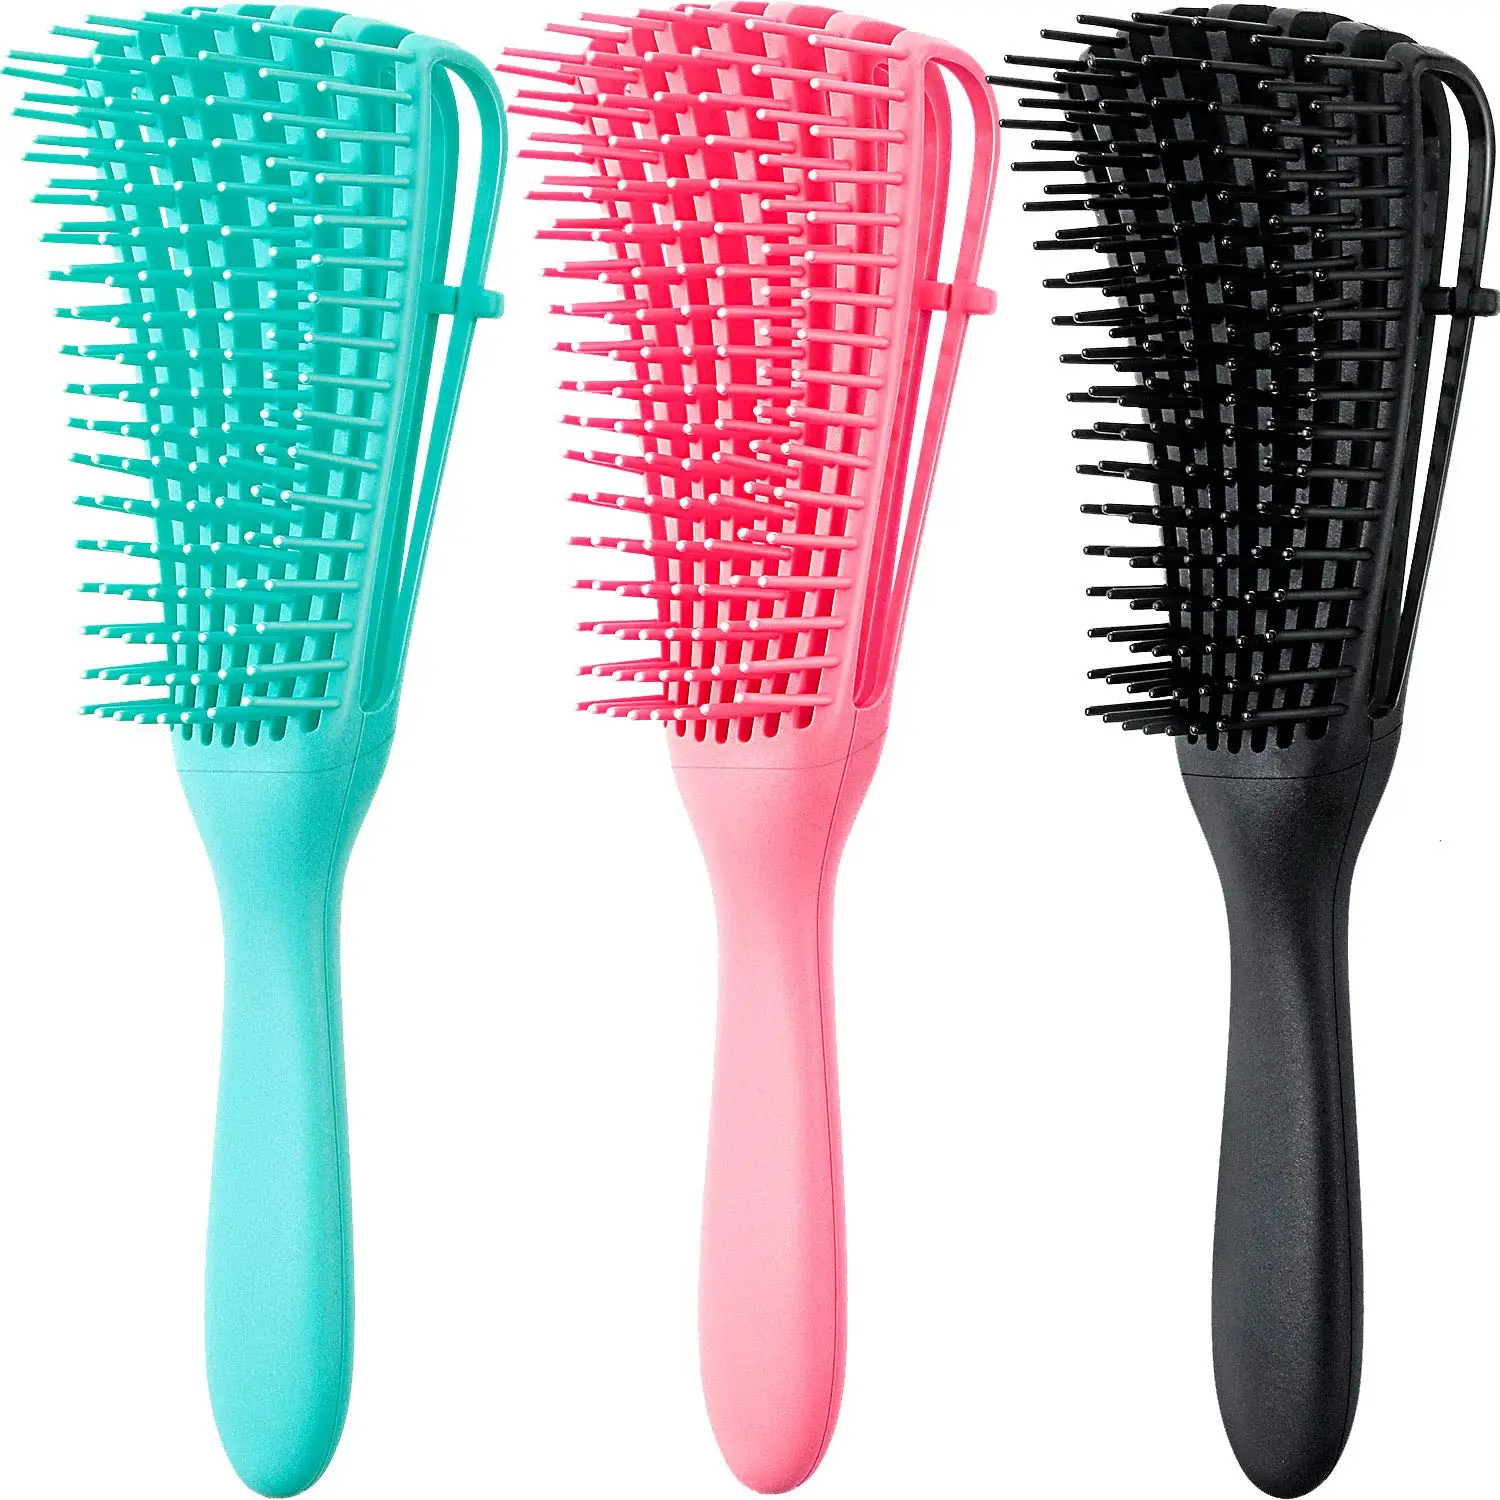 

Wholesale custom logo products eight rows detangling massage detangle hair brush for curly hair, Blue,pink,black,white...